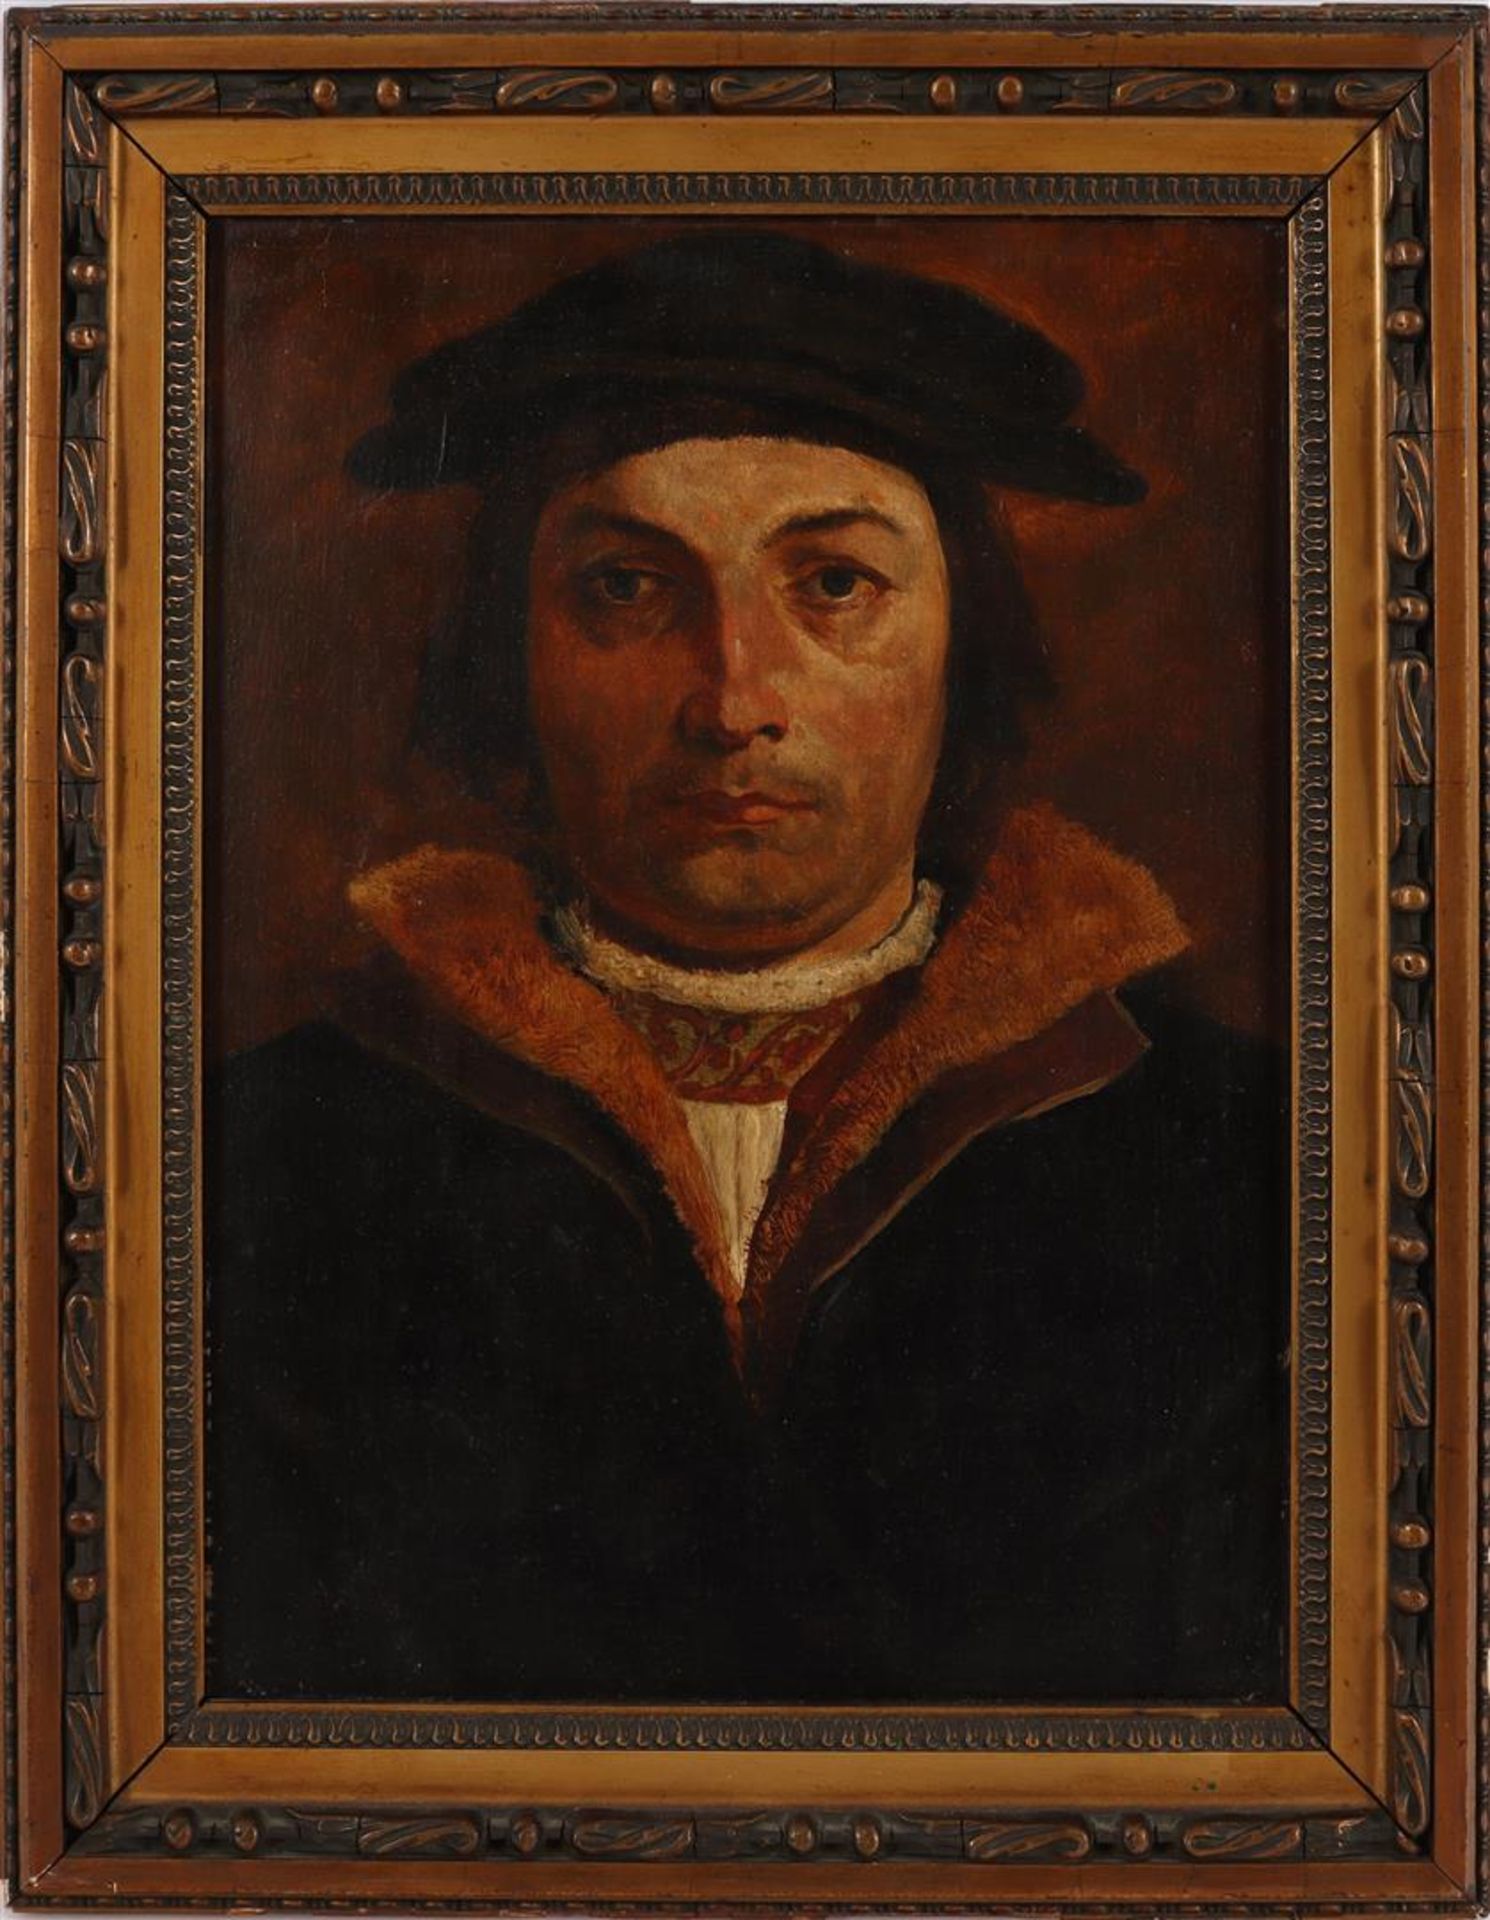 Anonymous, man with cap and coat with fur collar